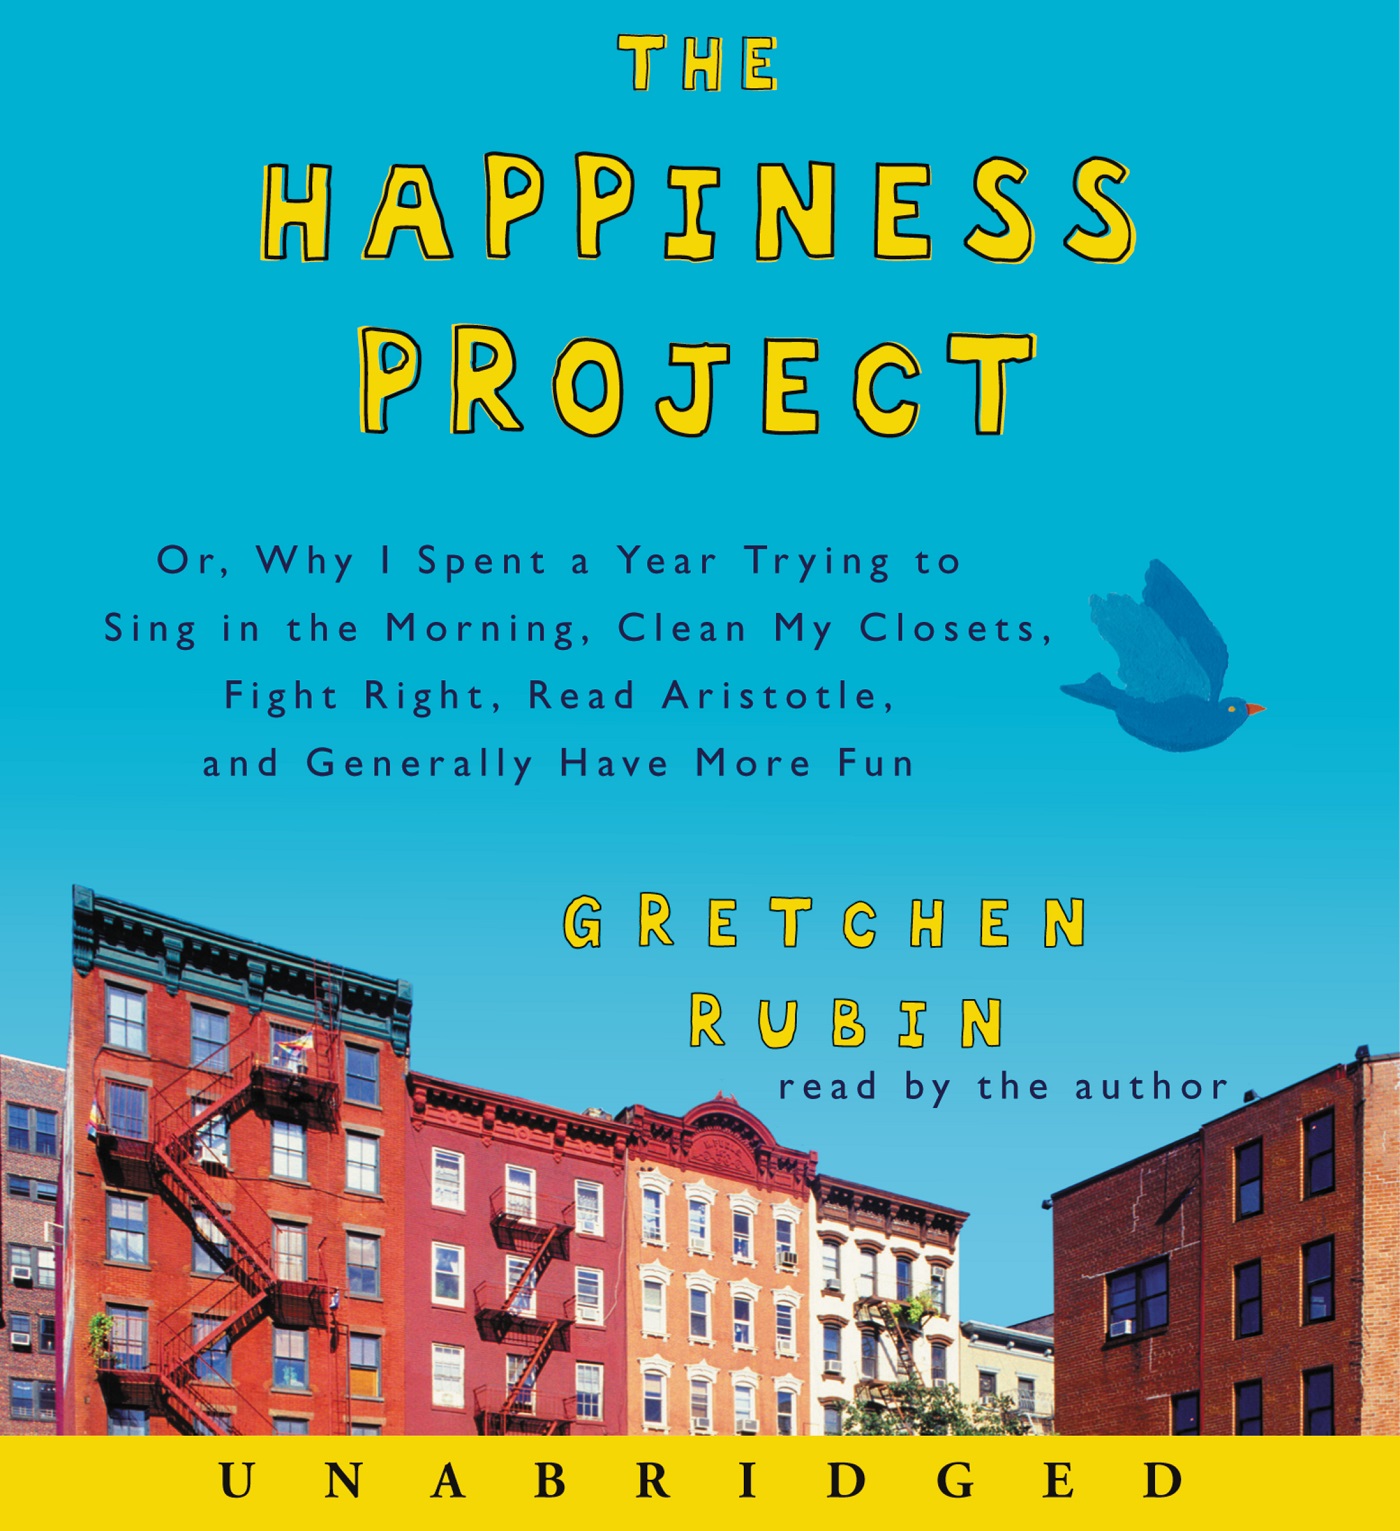 The Happiness Project.